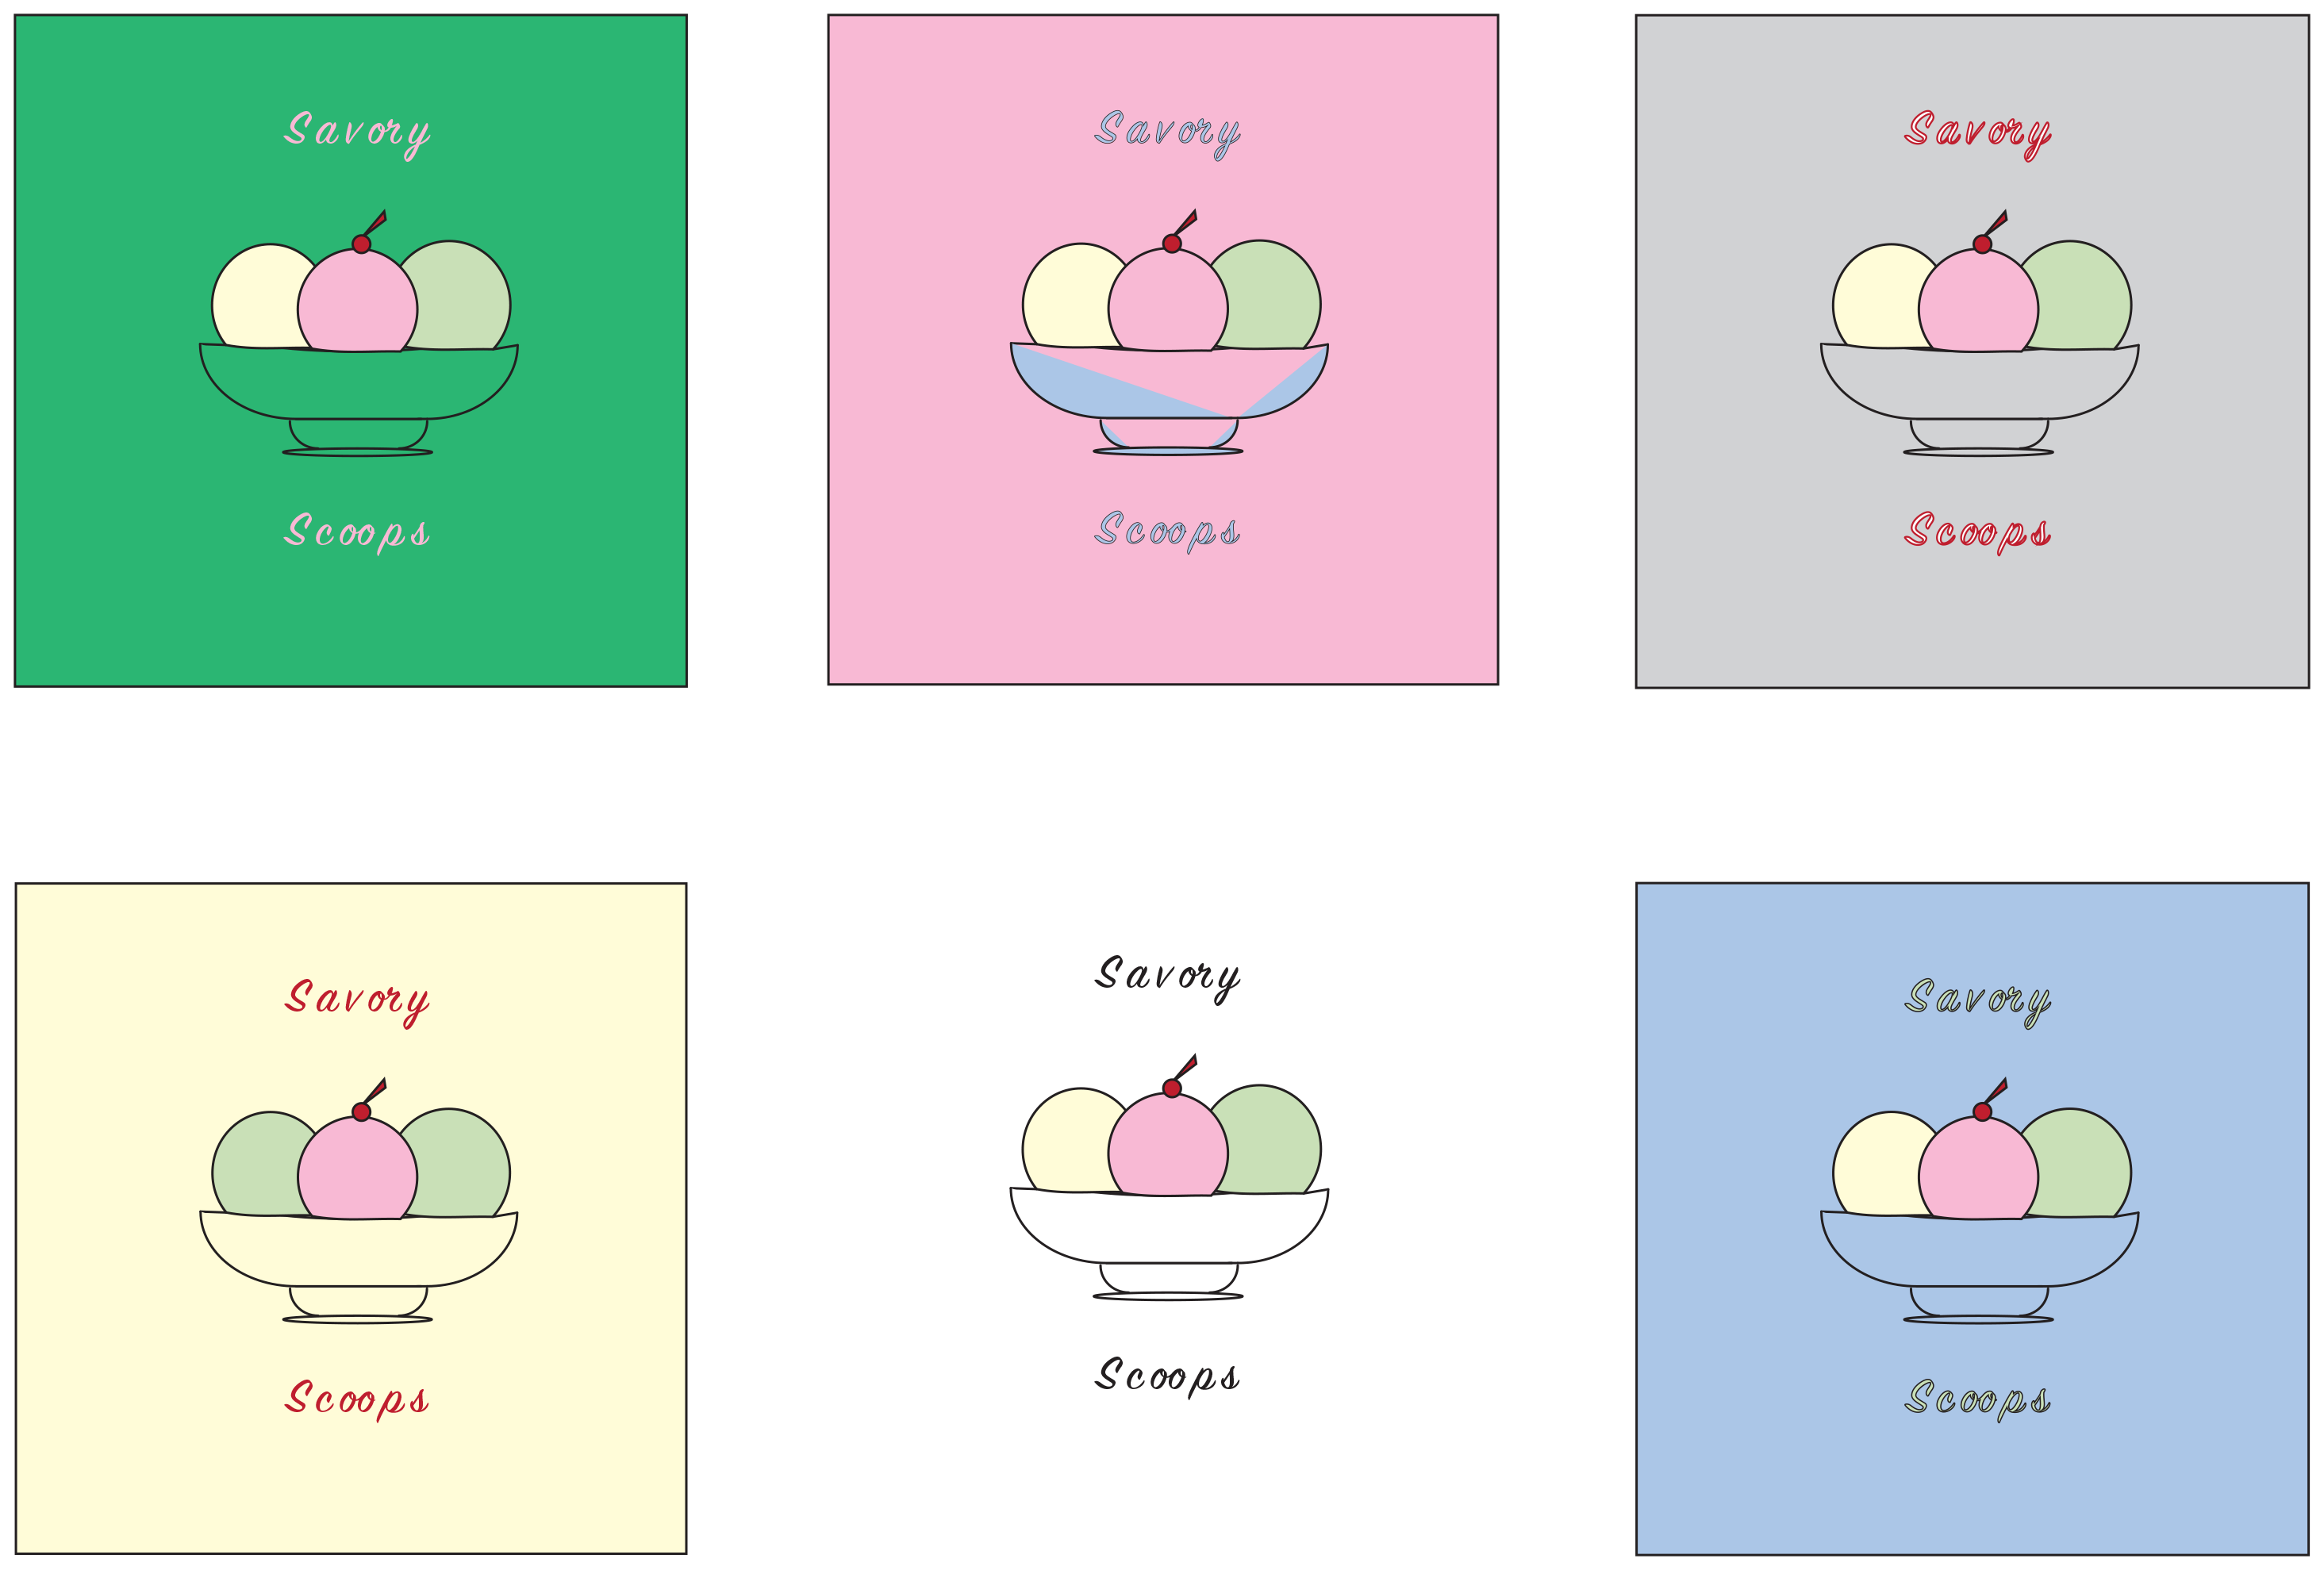 savory scoops logo version 2 in 6 color schemes